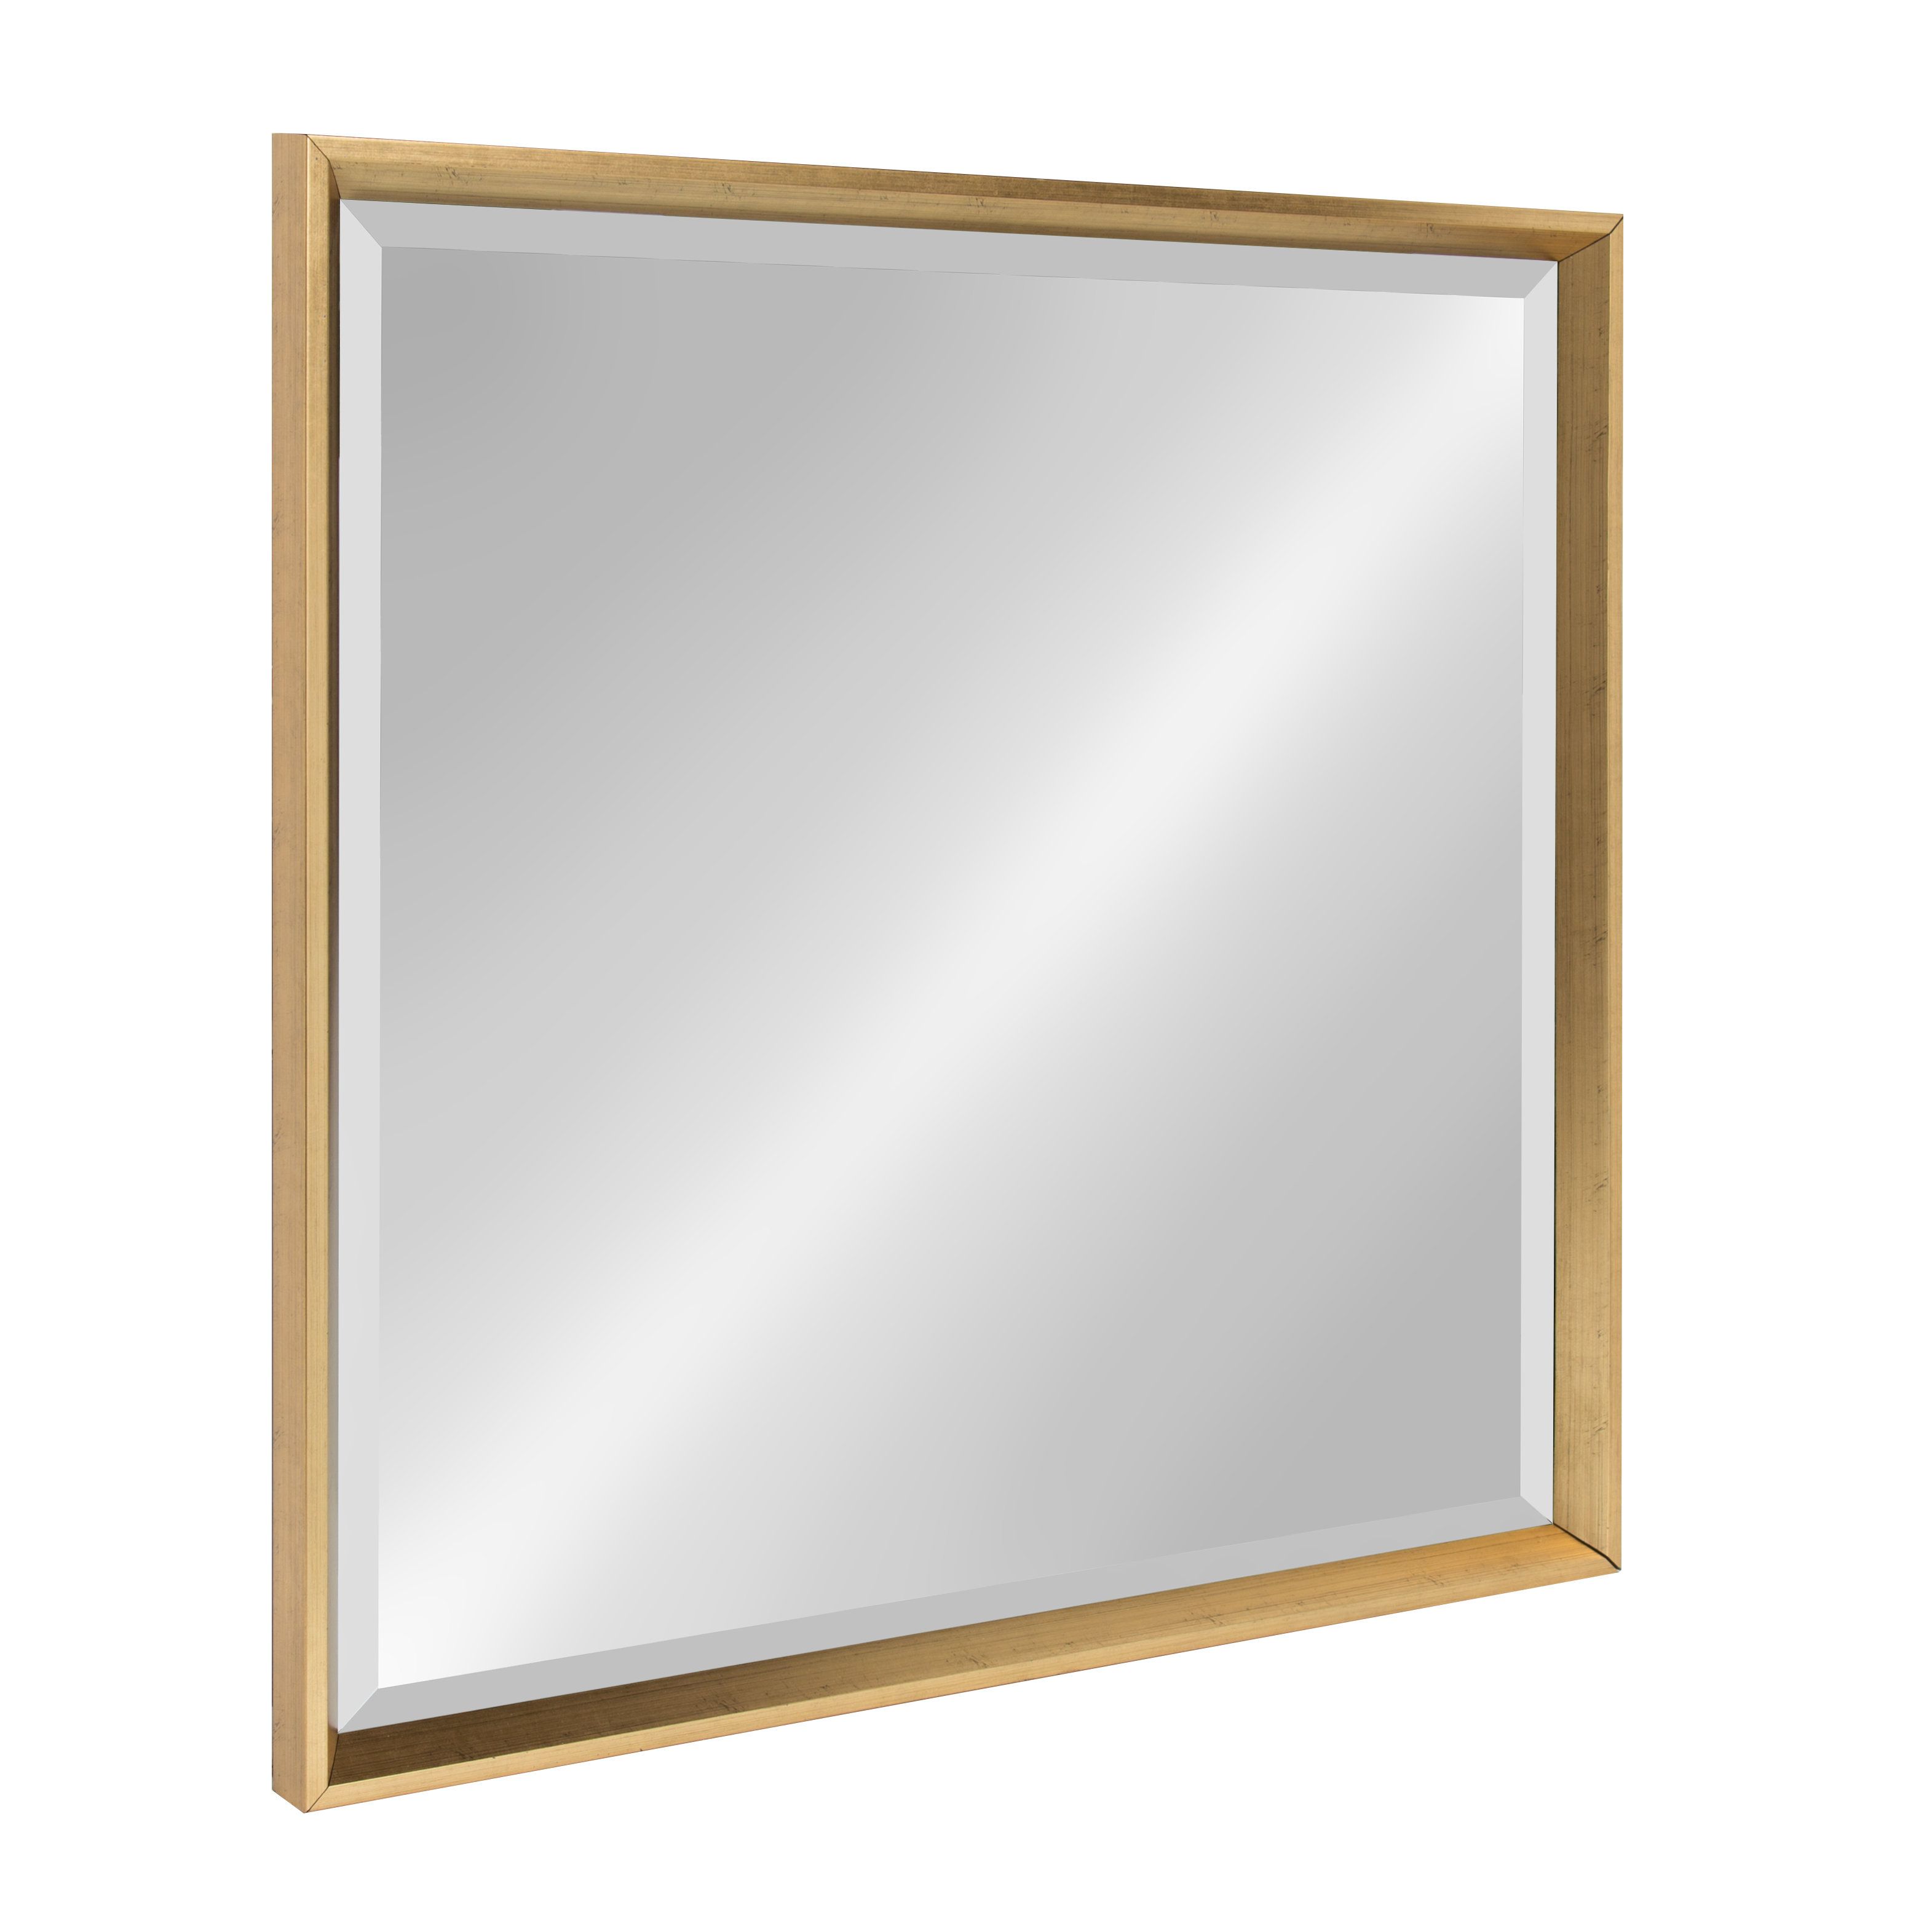 Saylor Wall Mirror | Joss & Main Within Ulus Accent Mirrors (View 17 of 20)